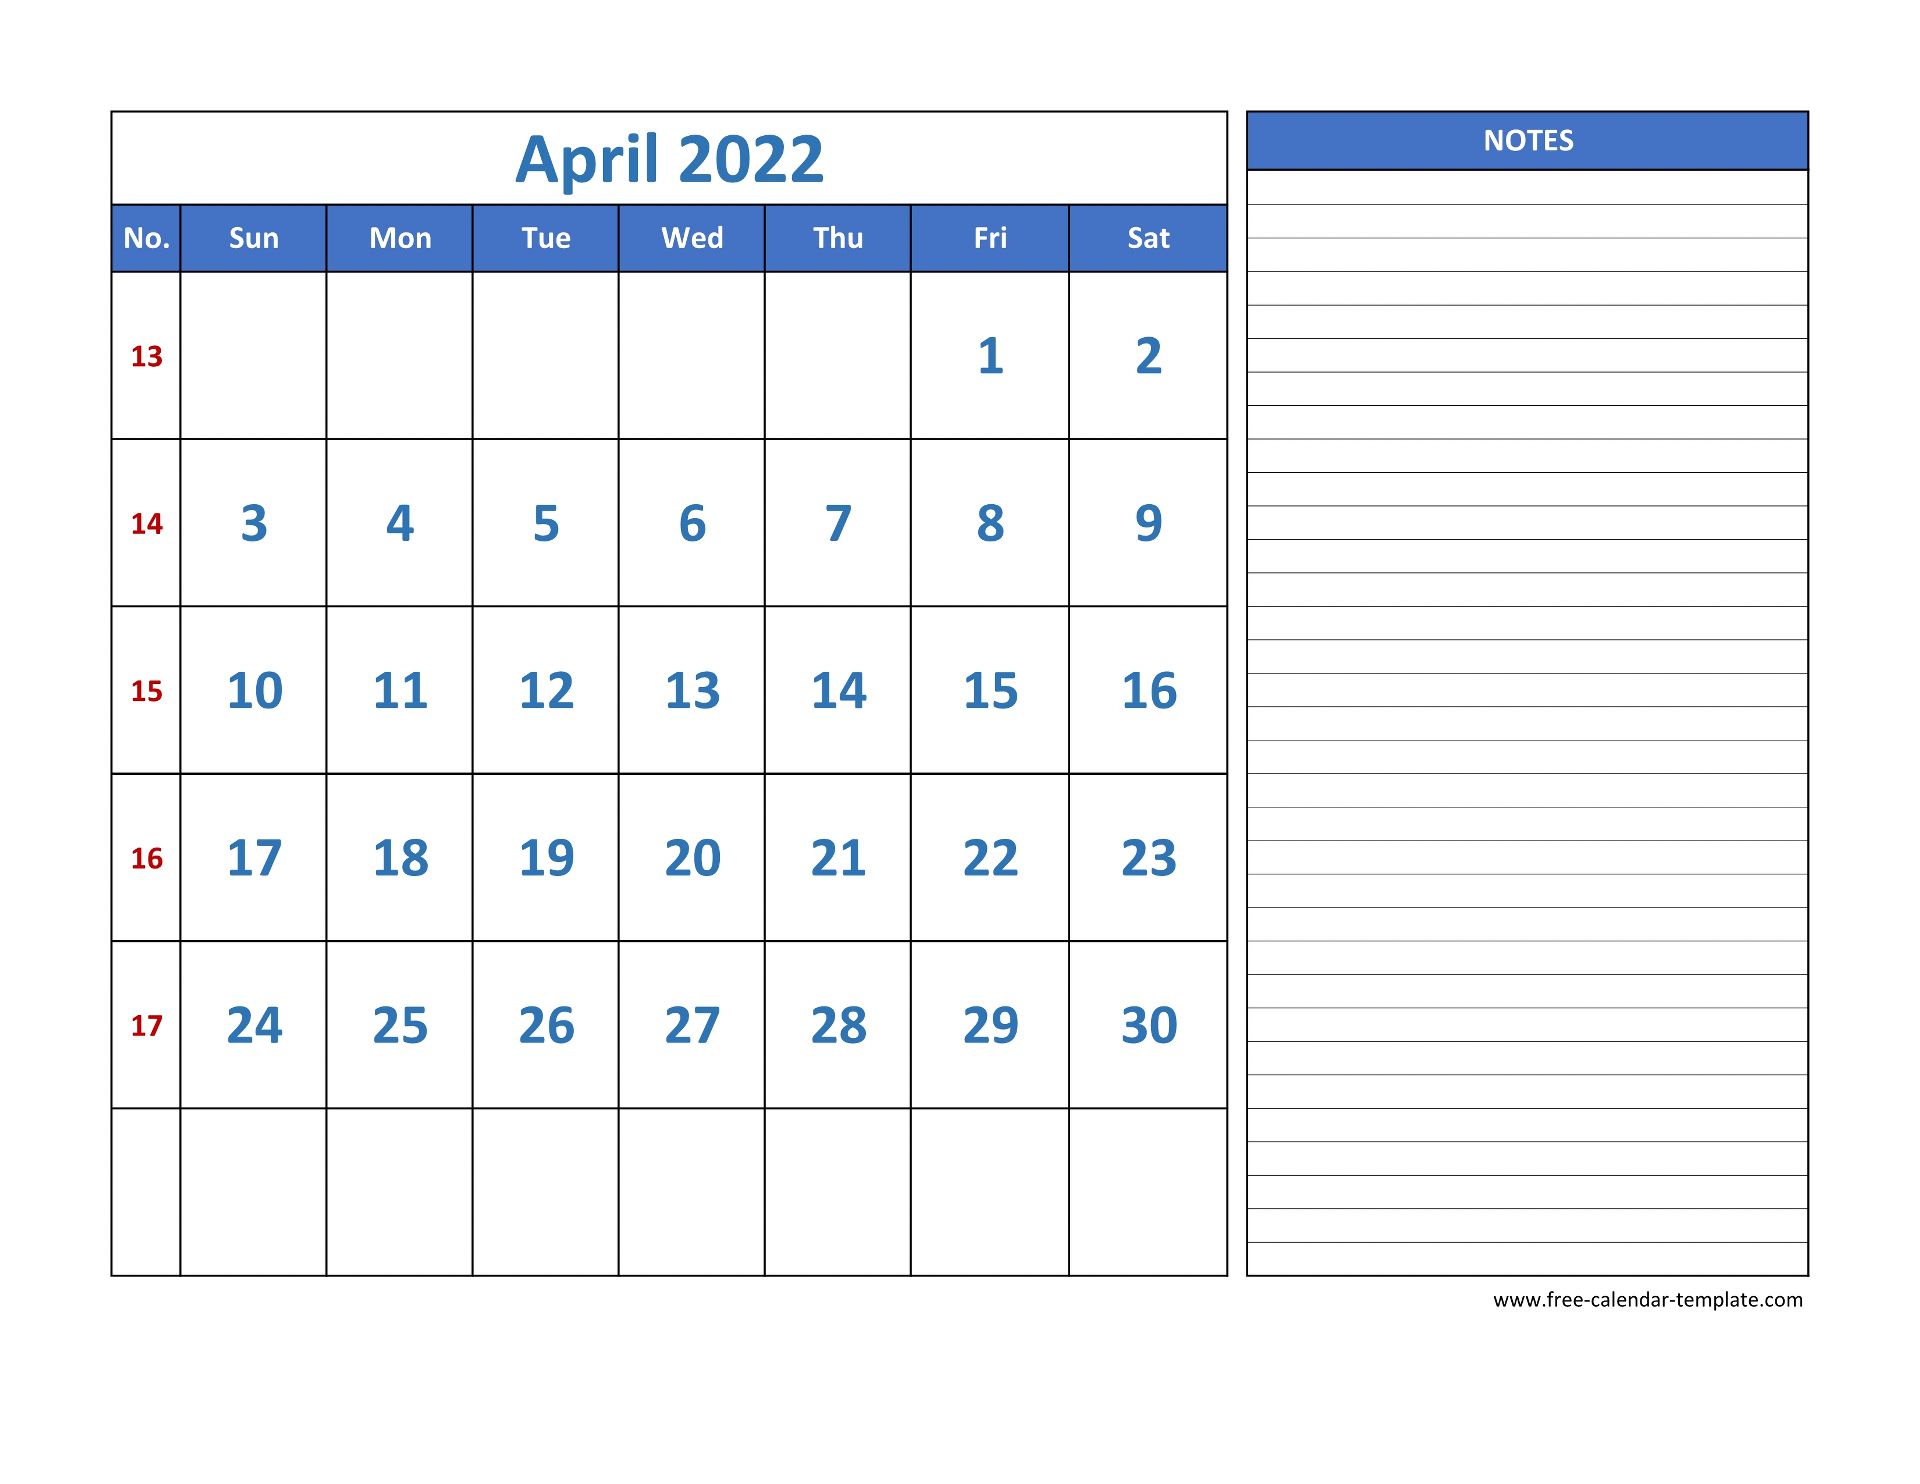 April Calendar 2022 grid lines for holidays and notes (horizontal